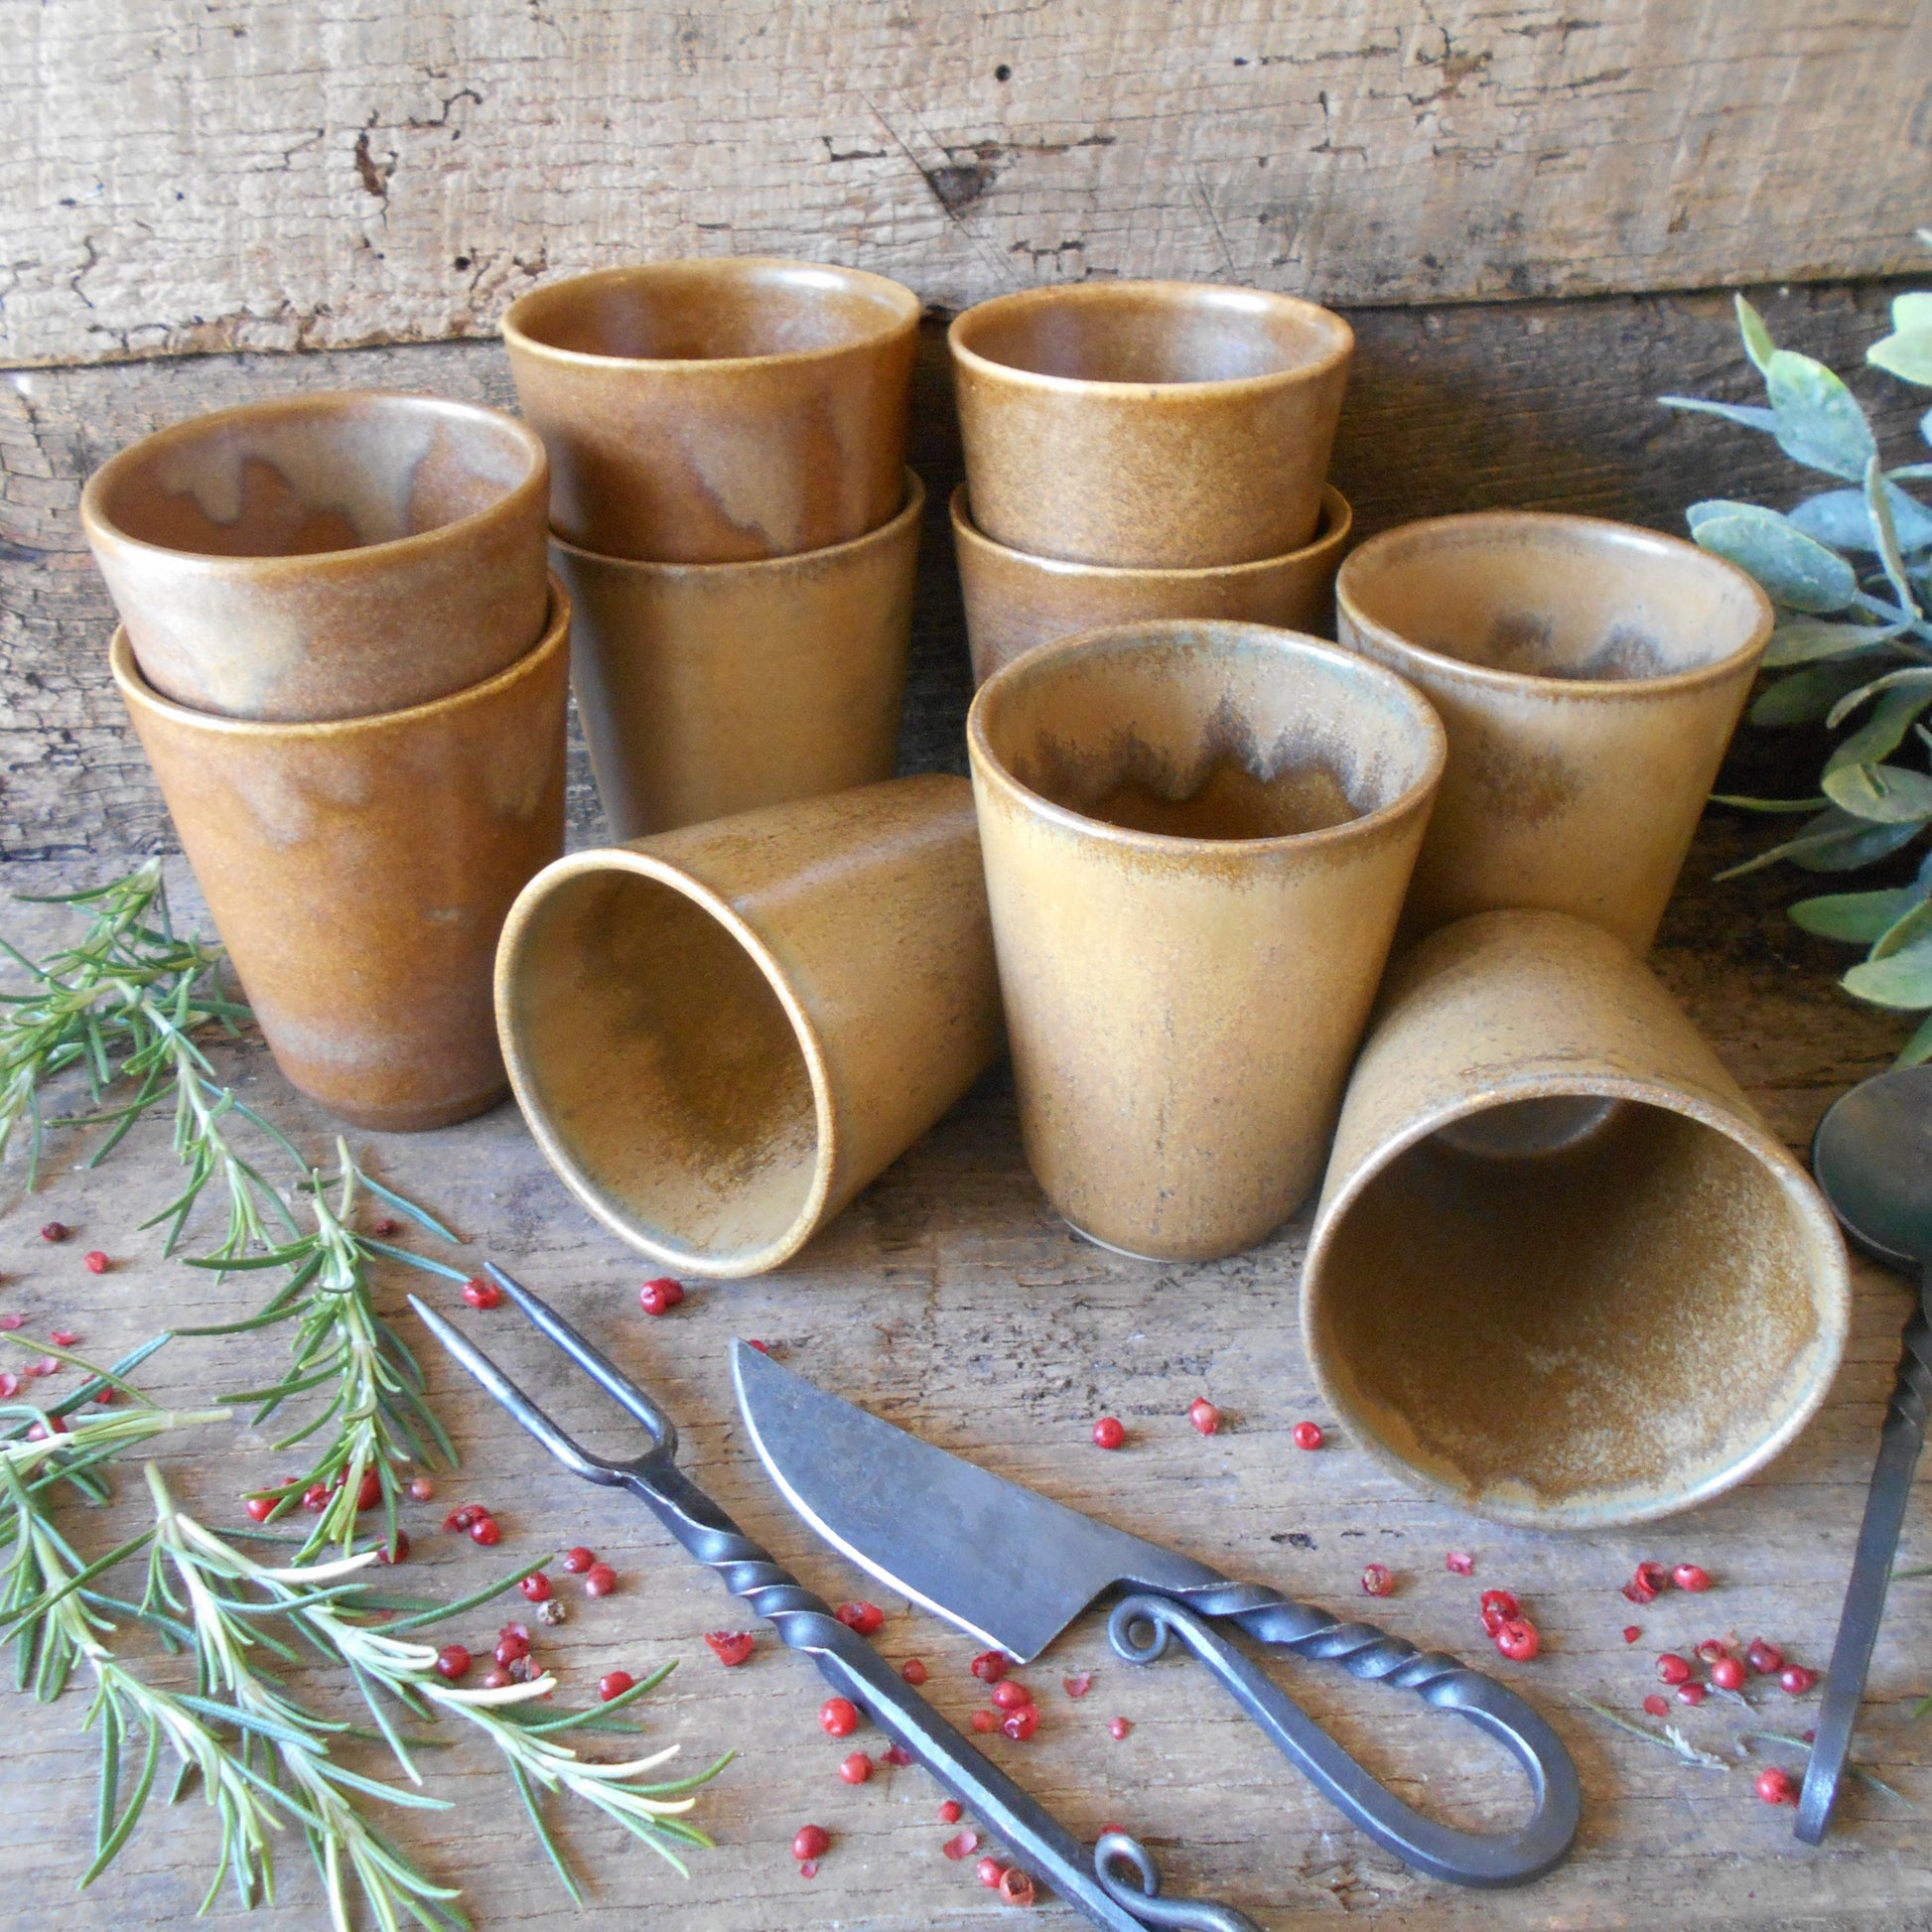 Ten Digoin Stoneware Tumblers. Medieval Re-enactment Pottery Goblets. from Tiggy & Pip - €120.00! Shop now at Tiggy and Pip